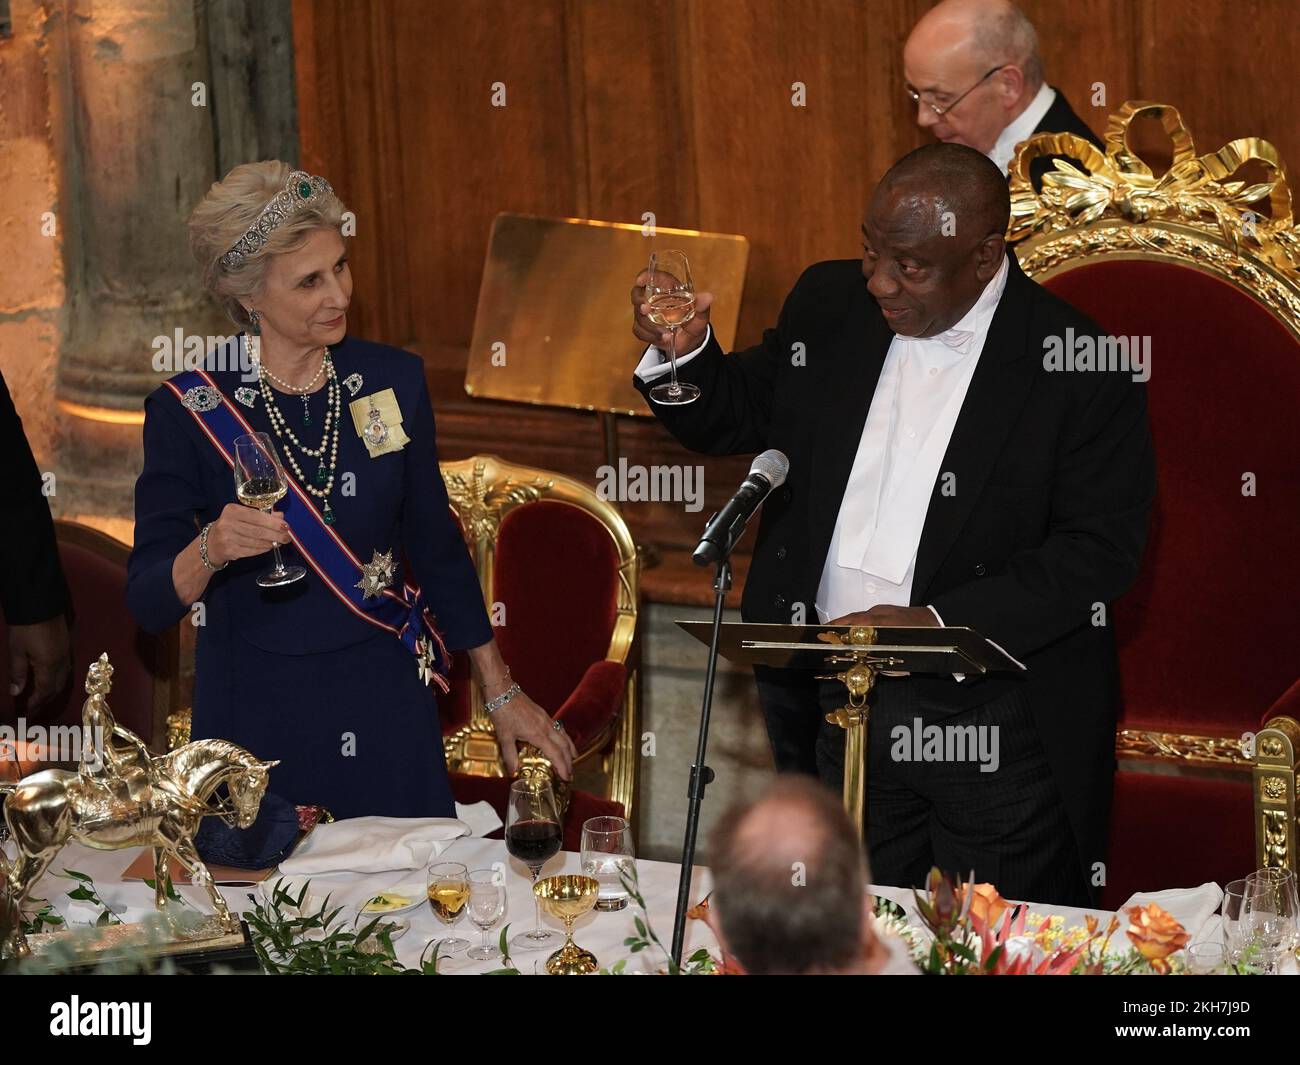 President Cyril Ramaphosa of South Africa, raises a toast, as the Duchess of Gloucester looks on during a banquet at the Guildhall in London, given by the Lord Mayor and City of London Corporation, during his state visit to the UK. Picture date: Wednesday November 23, 2022. Stock Photo